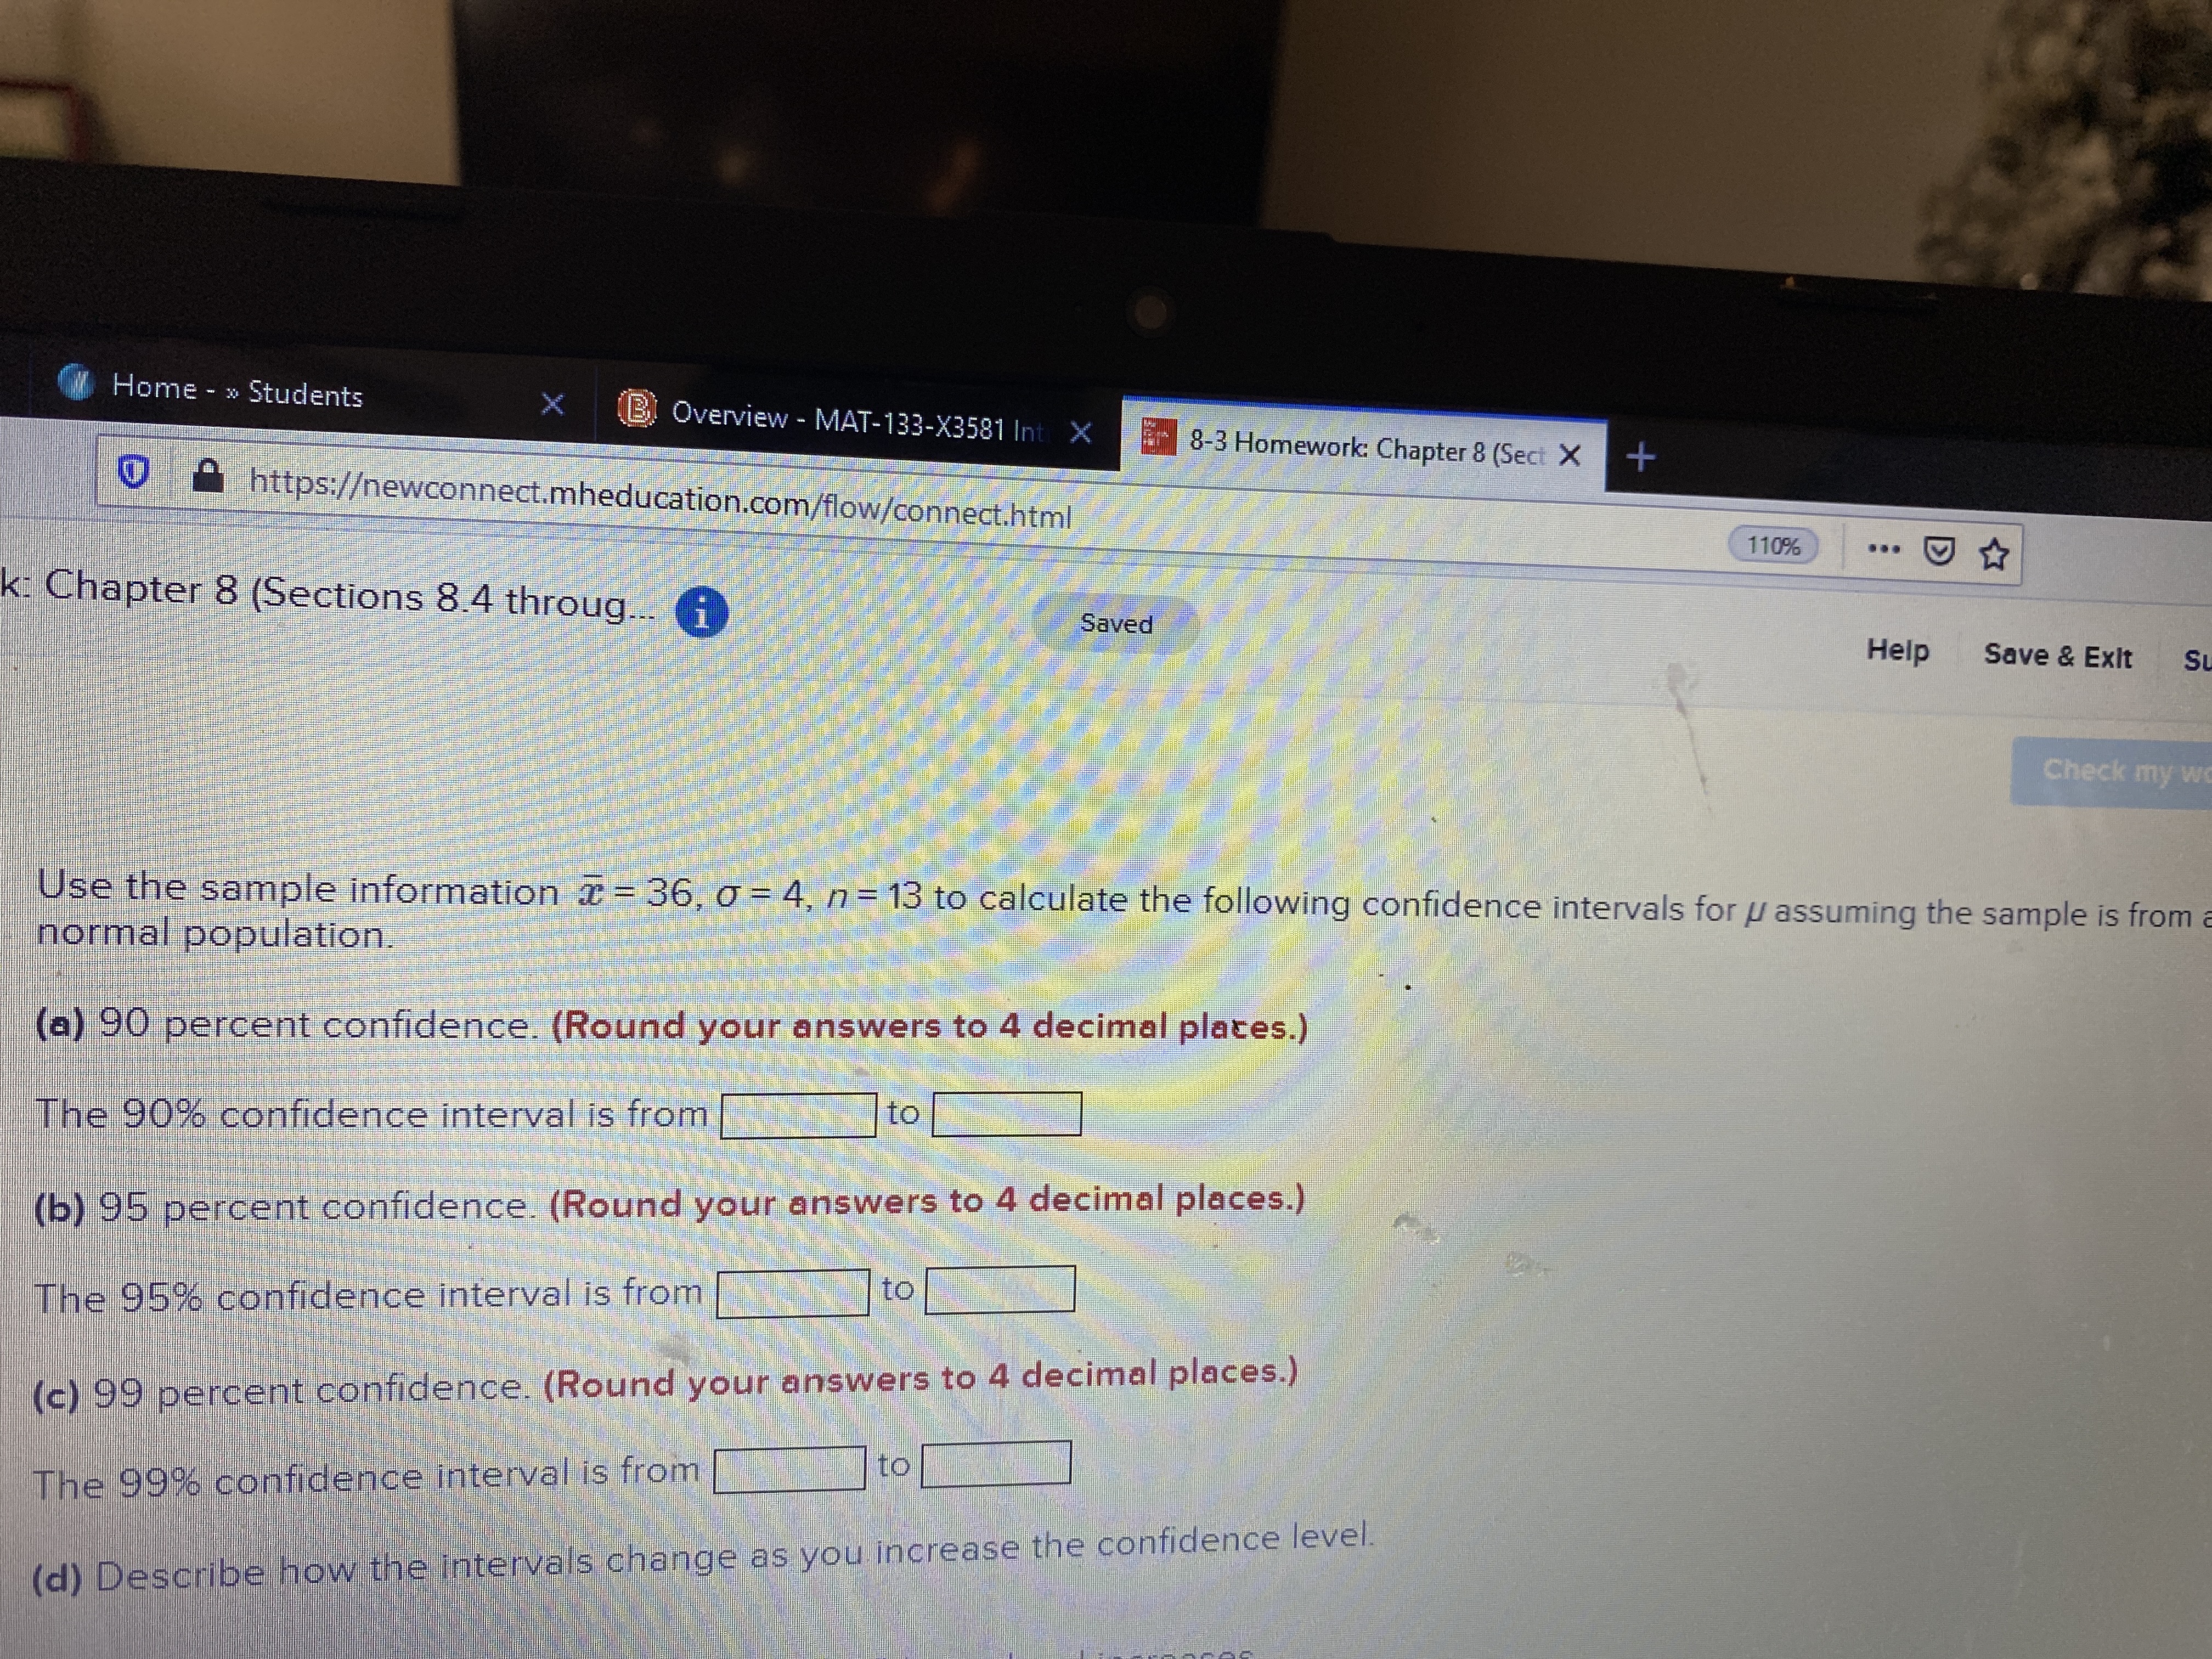 Home » Students
B Overview - MAT-133-X3581 Int X
8-3 Homework: Chapter 8 (Sect X+
https://newconnect.mheducation.com/flow/connect.html
110%
k: Chapter 8 (Sections 8.4 throug..i
Saved
Help
Save & Exit
Su
Check my wC
Use the sample information = 36, o = 4, n= 13 to calculate the following confidence intervals for u assuming the sample is from a
normal population.
(a) 90 percent confidence. (Round your answers to 4 decimal plates.)
to
The 90% confidence interval is from
(b) 95 percent confidence. (Round your answers to 4 decimal places.)
to
The 95% confidence interval is from
(c) 99 percent confidence. (Round your answers to 4 decimal places.)
to
The 99% confidence interval is from
(d) Describe how the intervals change as you increase the confidence level.
